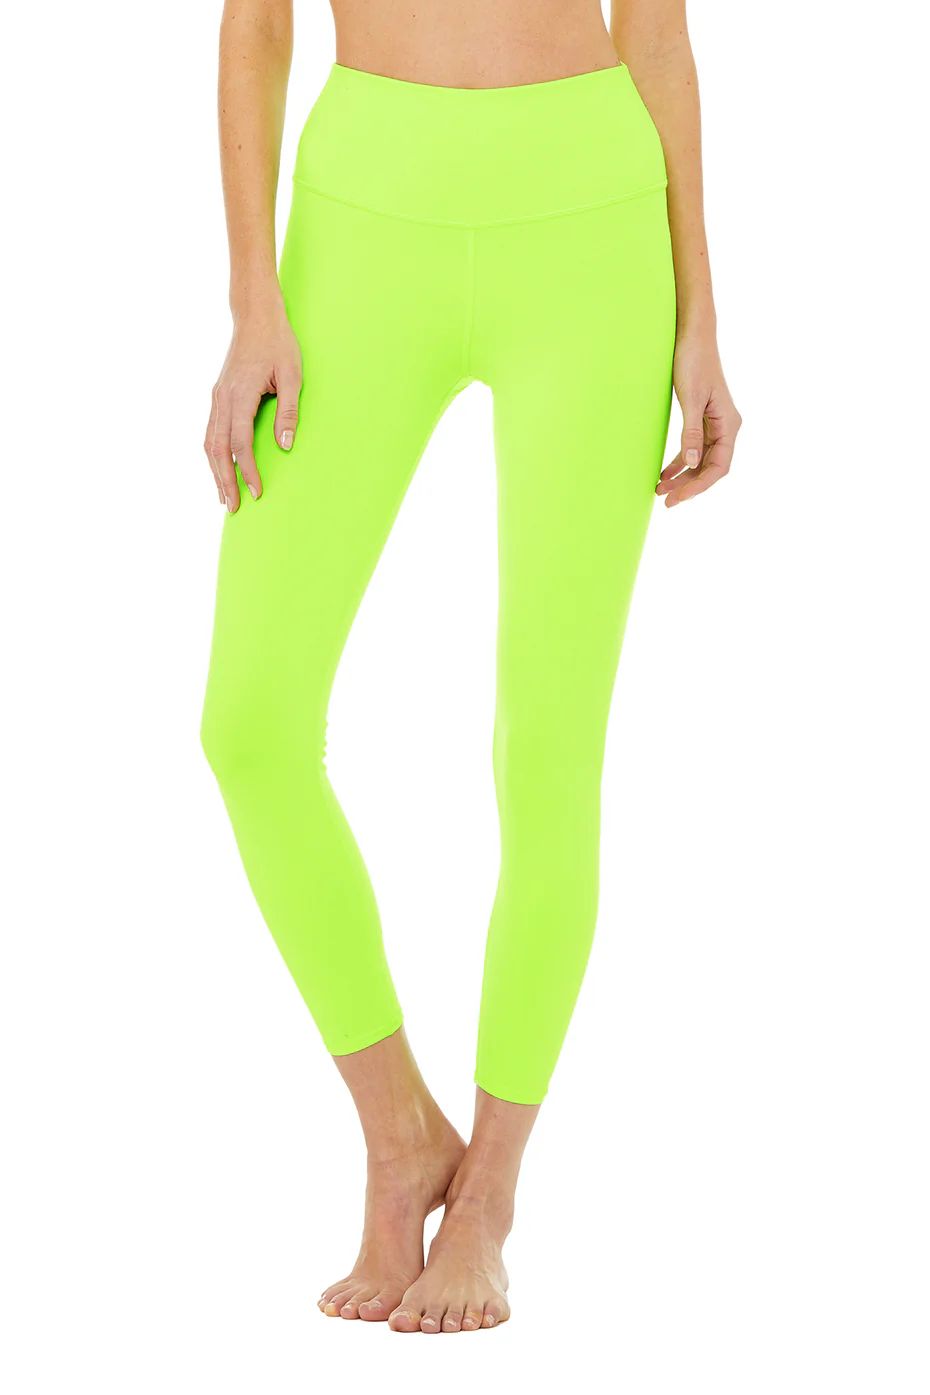 Limited-Edition Exclusive 7/8 High-Waist Neon Airbrush Legging in Acid Lime, Size: Large | Alo YogaÂ | Alo Yoga